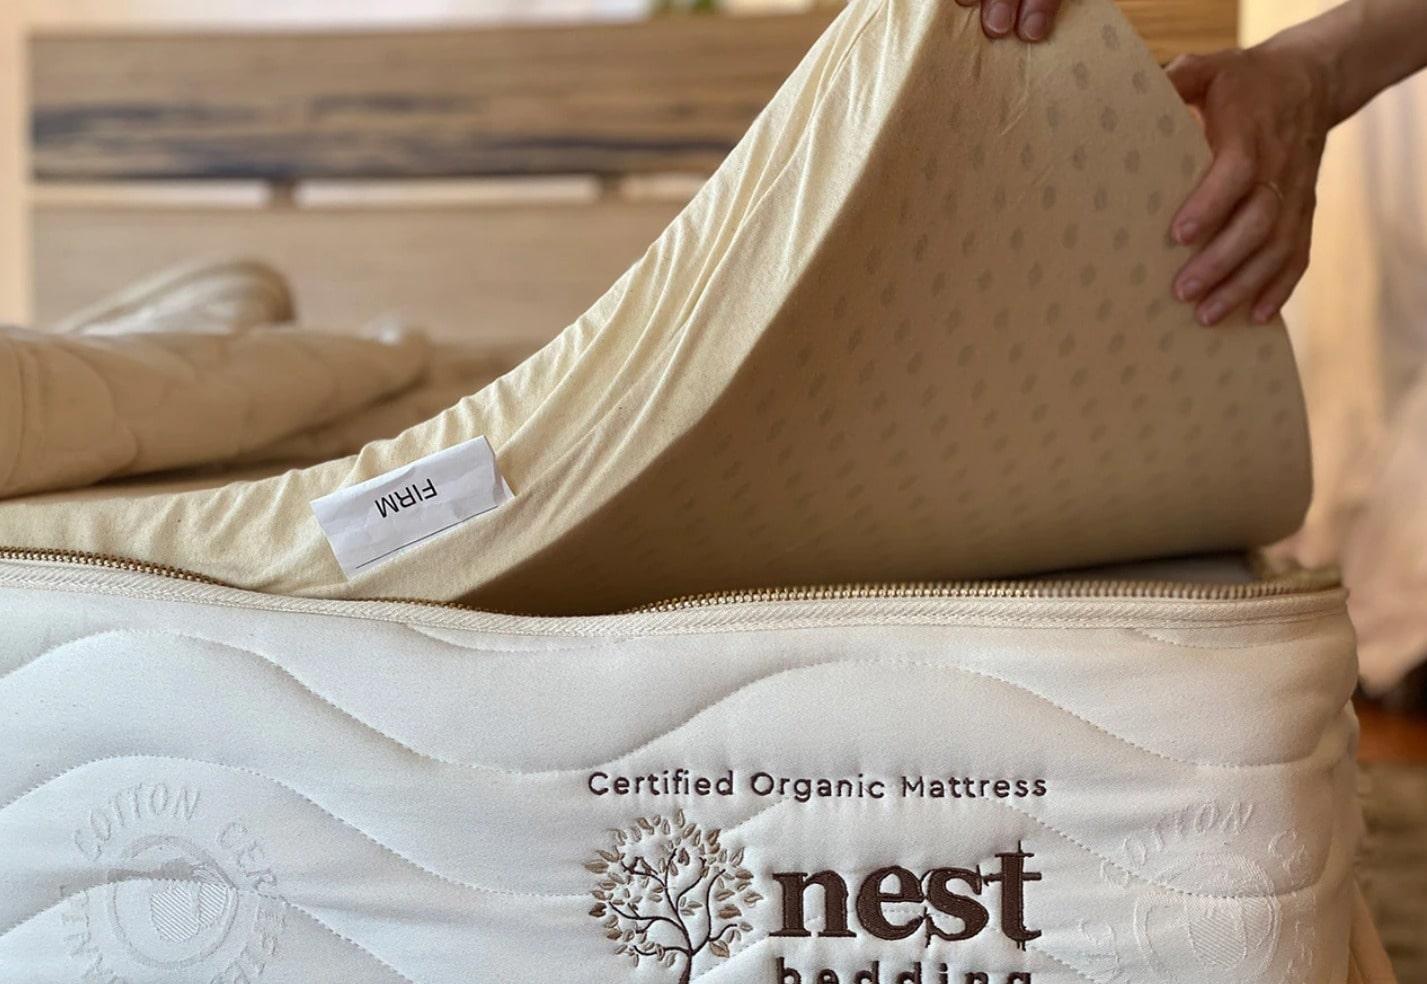 Nest Bedding Finch Review of the mattress layers: organic cotton cover, wool fire barrier, a 3 inch Dunlop latex layer and a 6 inch Dunlop latex layer. 